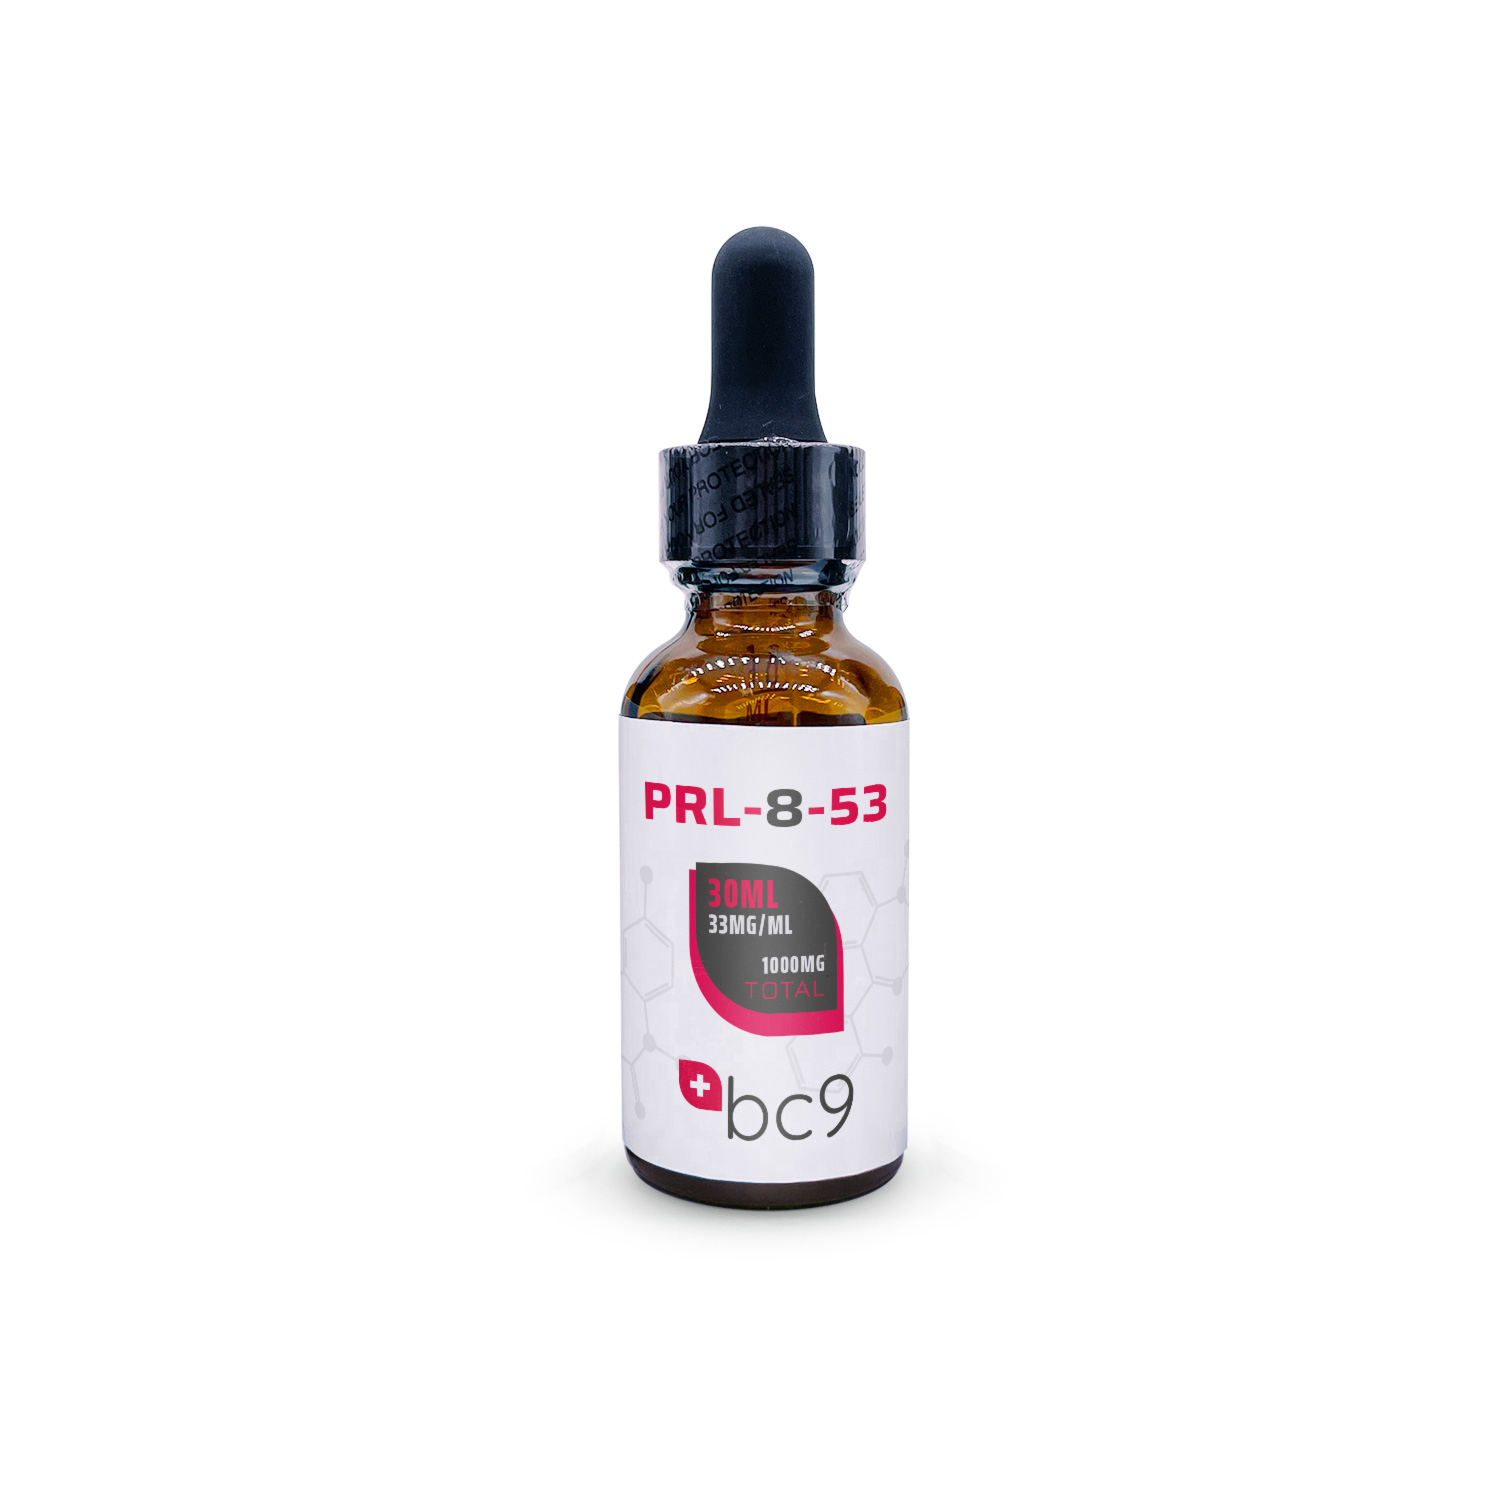 PRL-8-53 Liquid For Sale | Fast Shipping | BC9.org